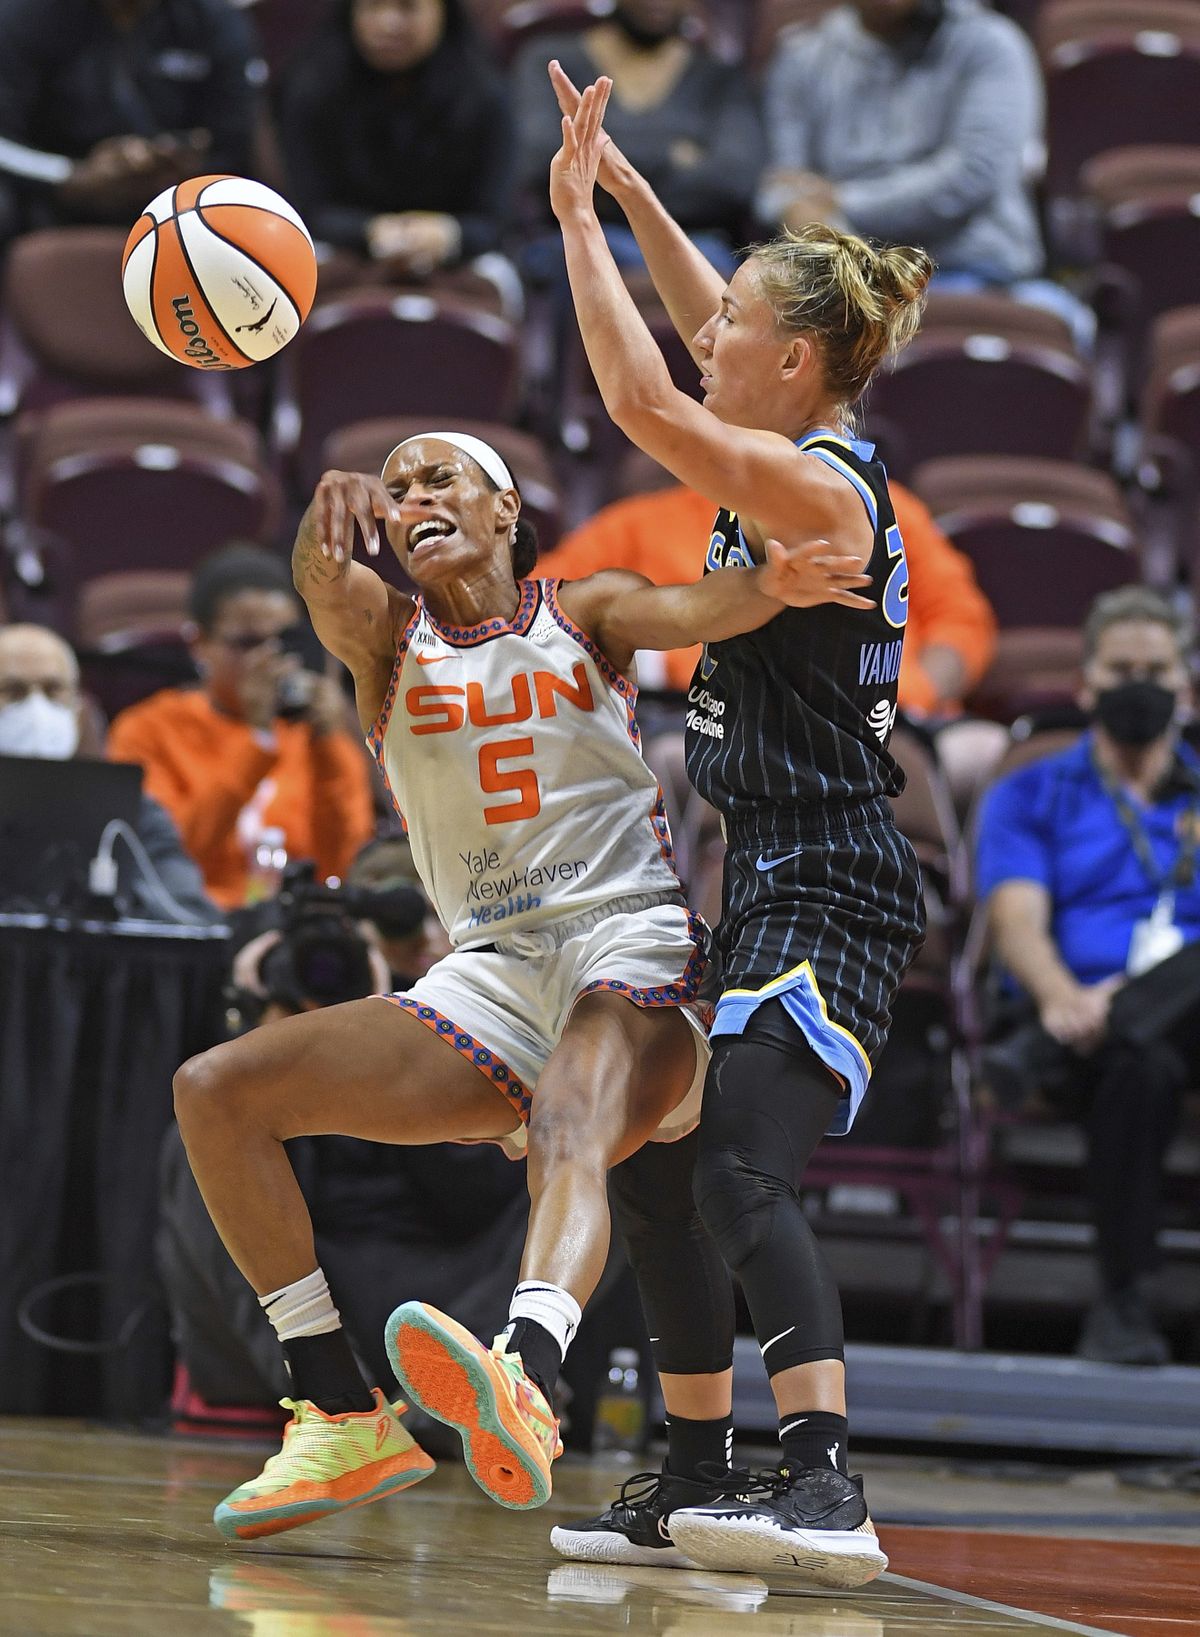 Connecticut Sun guard Jasmine Thomas commits a turnover under pressure from Chicago Sky guard Courtney Vandersloot during a WNBA semifinal playoff basketball game, Tuesday, Sept. 28, 2021, at Mohegan Sun Arena in Uncasville, Conn.  (SEAN D. ELLIOT)